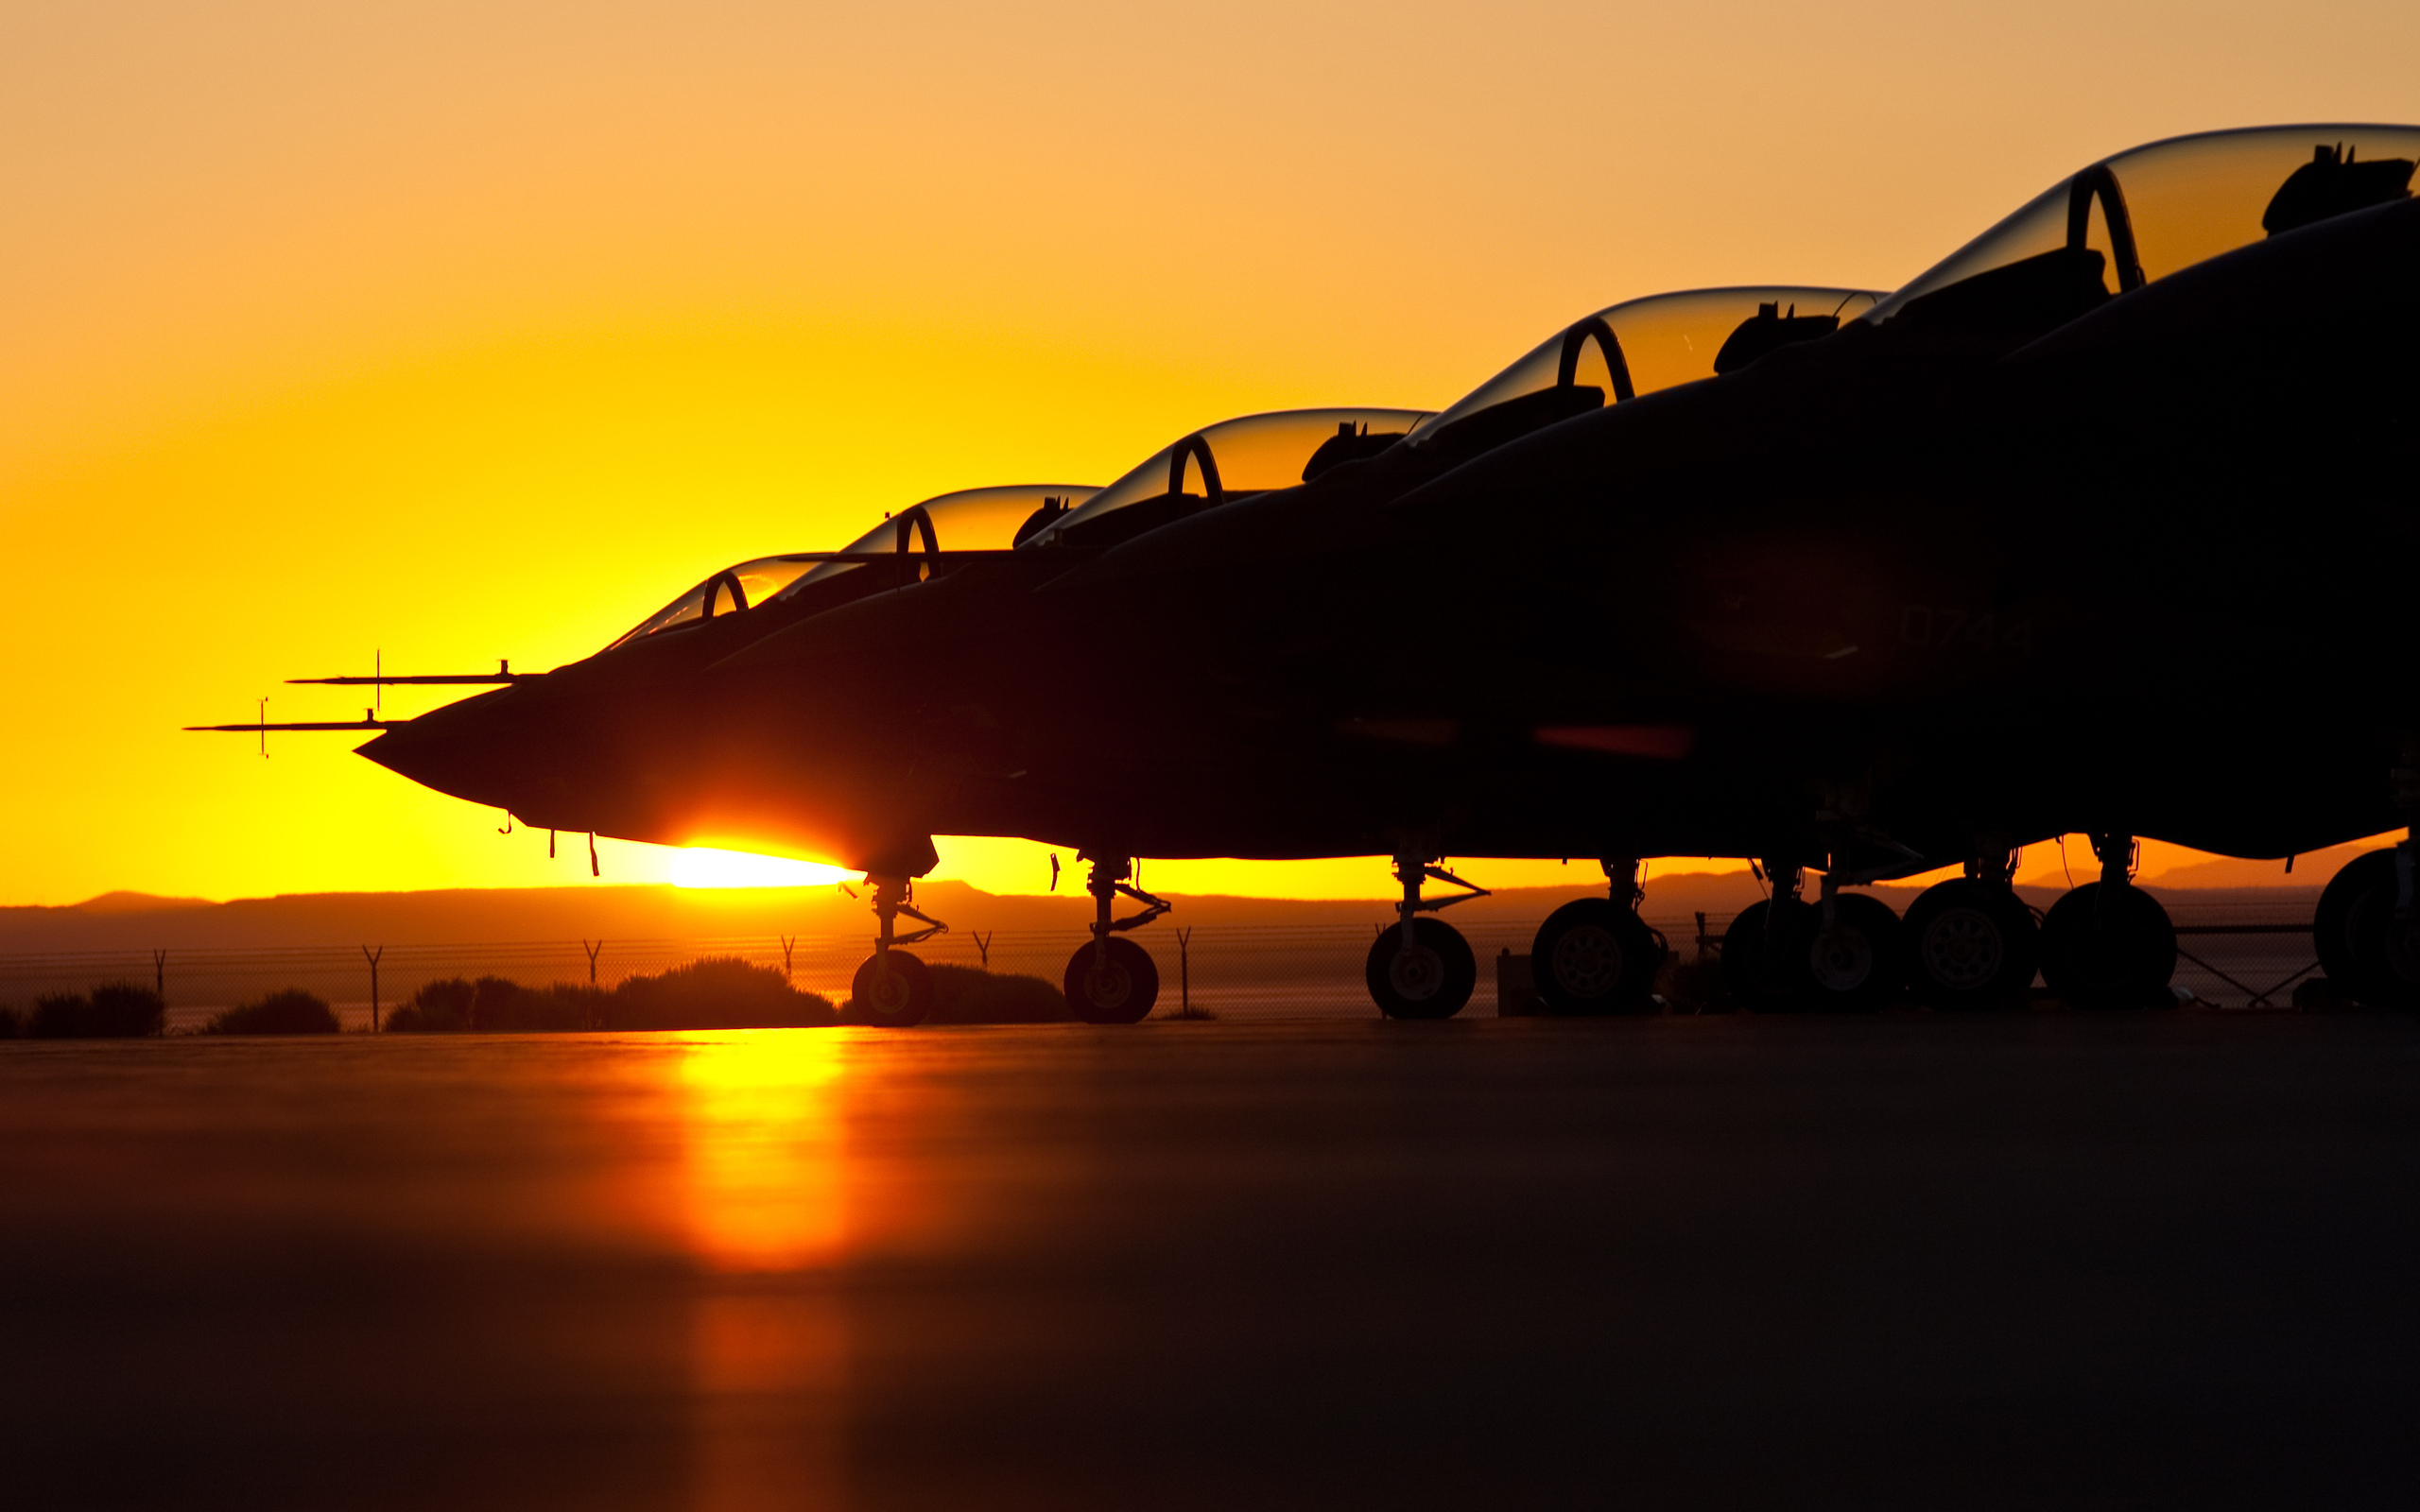 vehicles, Aircraft, Airplanes, Planes, Jet, Fighter, Weapons, Wheels, Canopy, Sunset, Sunrise, Sun, Color, Landscapes Wallpaper